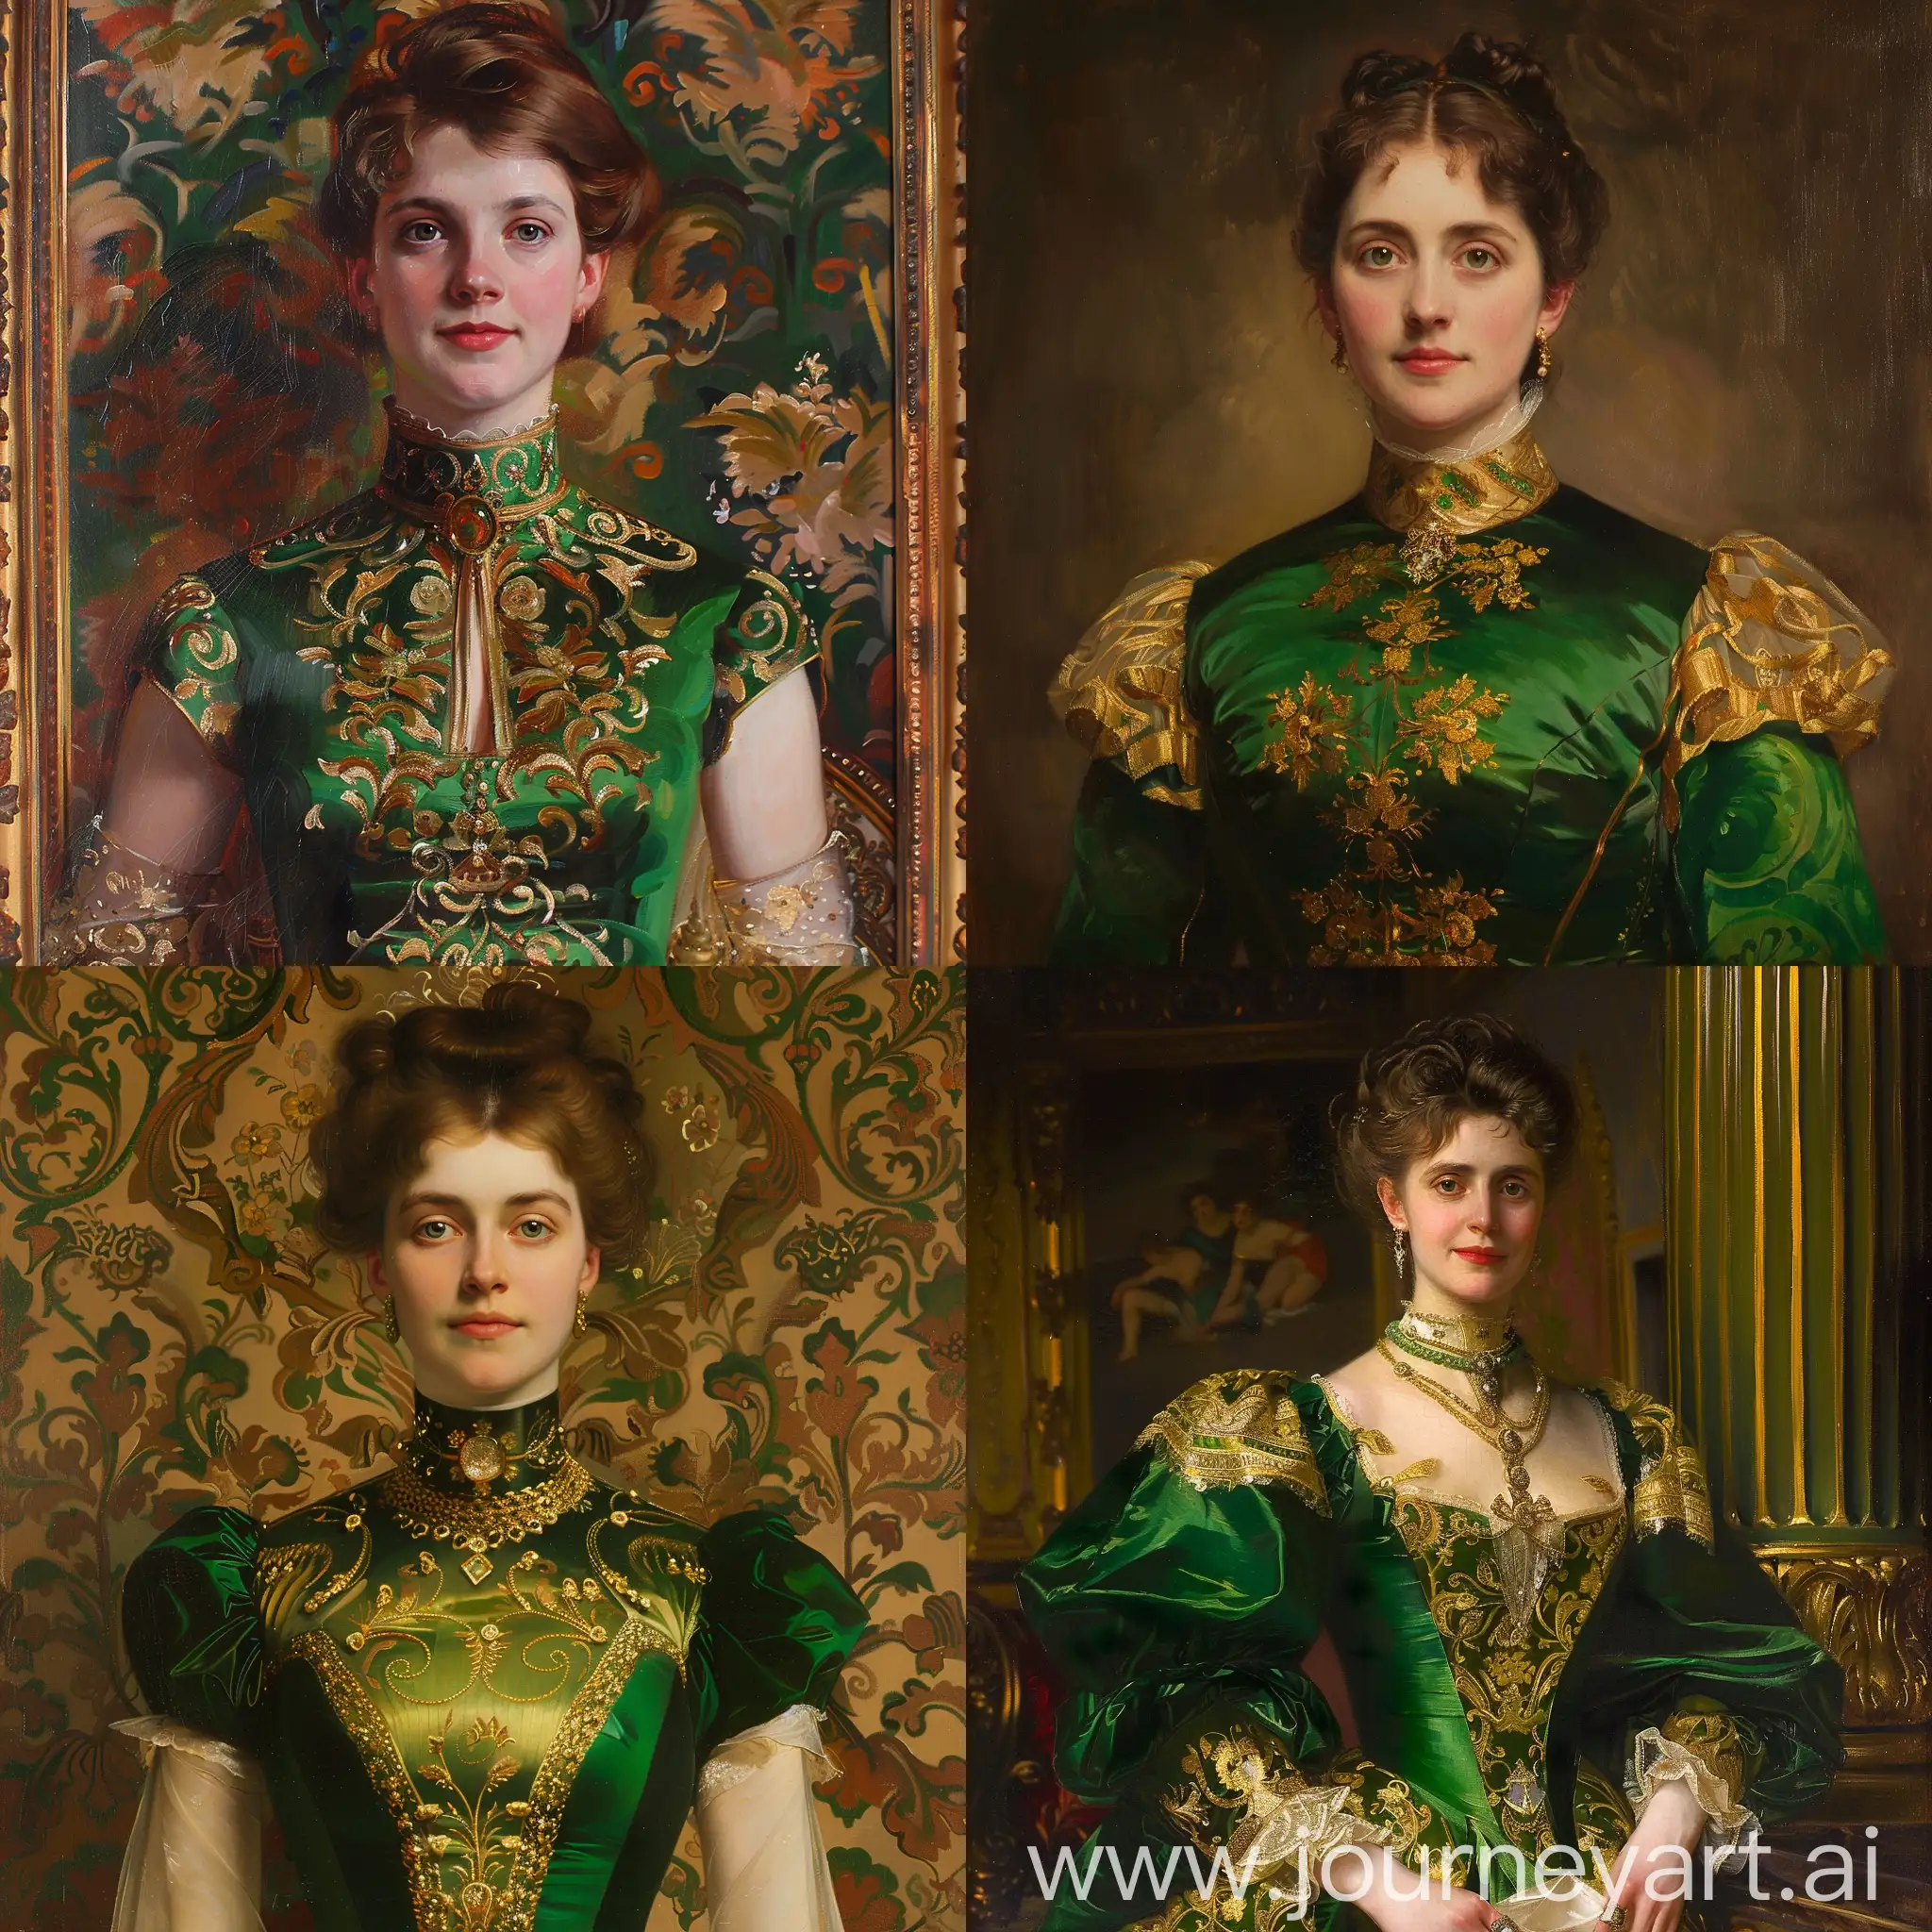 Baroque-Style-Portrait-of-British-Aristocracy-Woman-in-Green-and-Gold-Dress